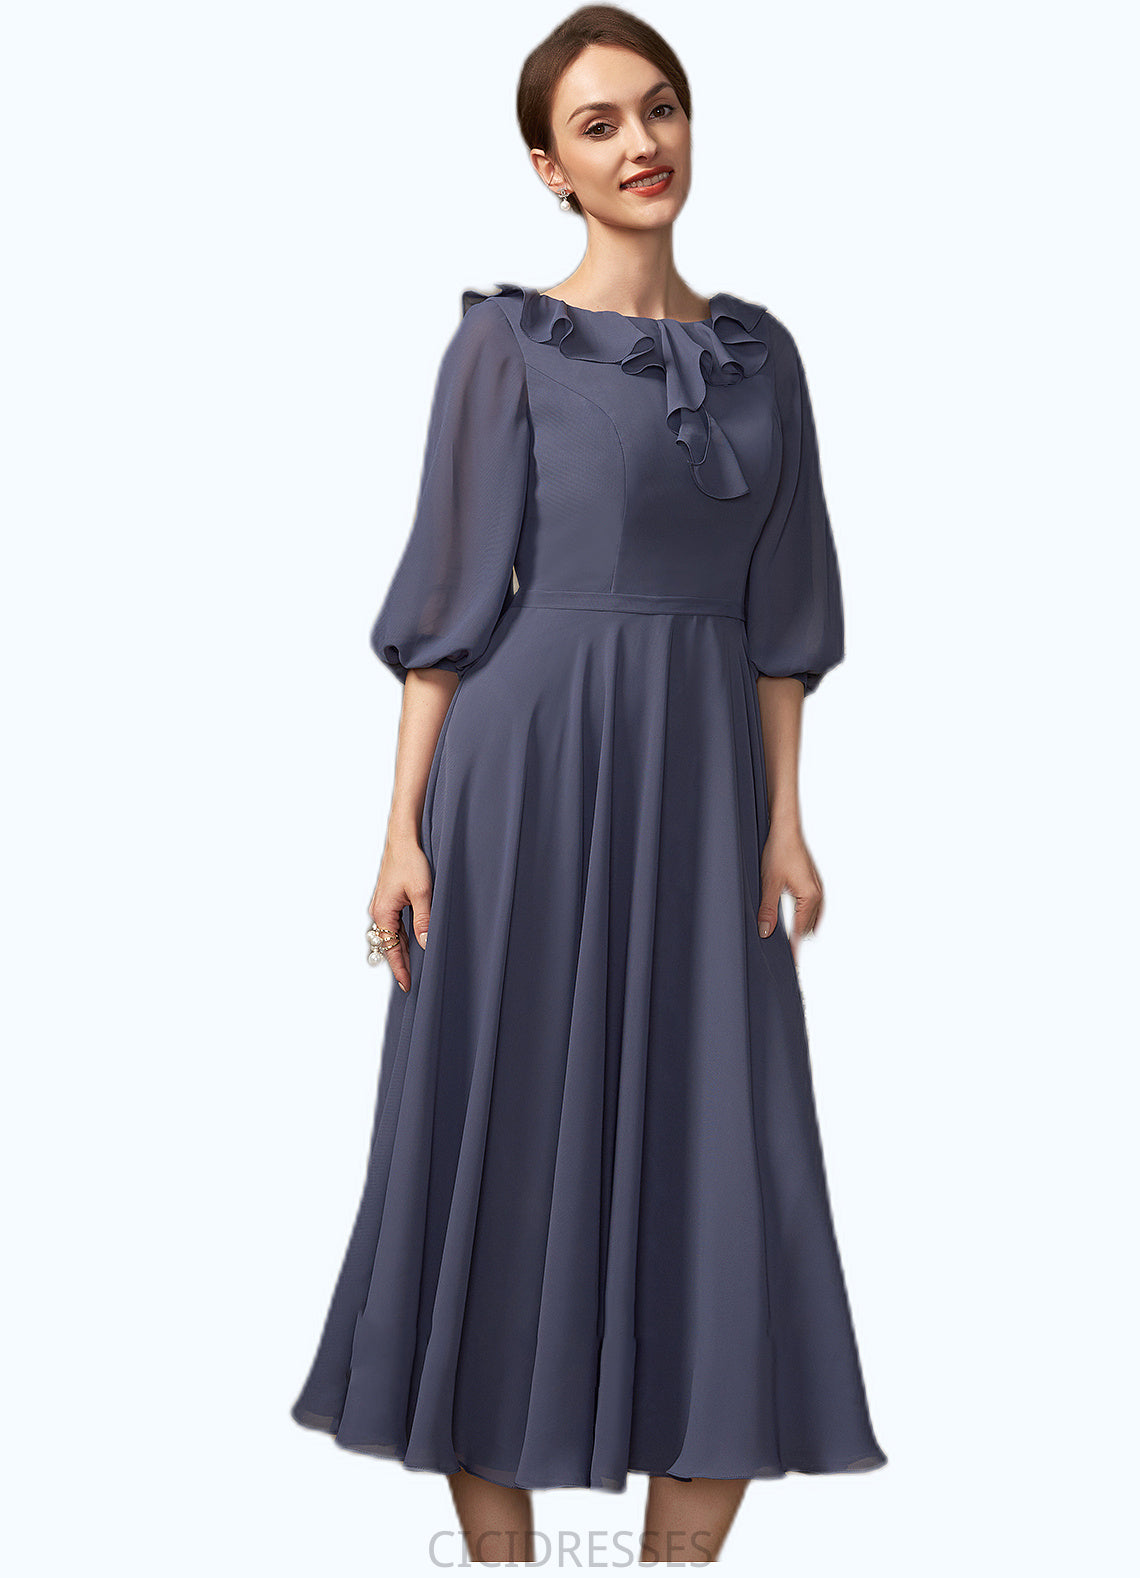 Blanche A-Line Scoop Neck Tea-Length Chiffon Mother of the Bride Dress With Cascading Ruffles CIC8126P0014920